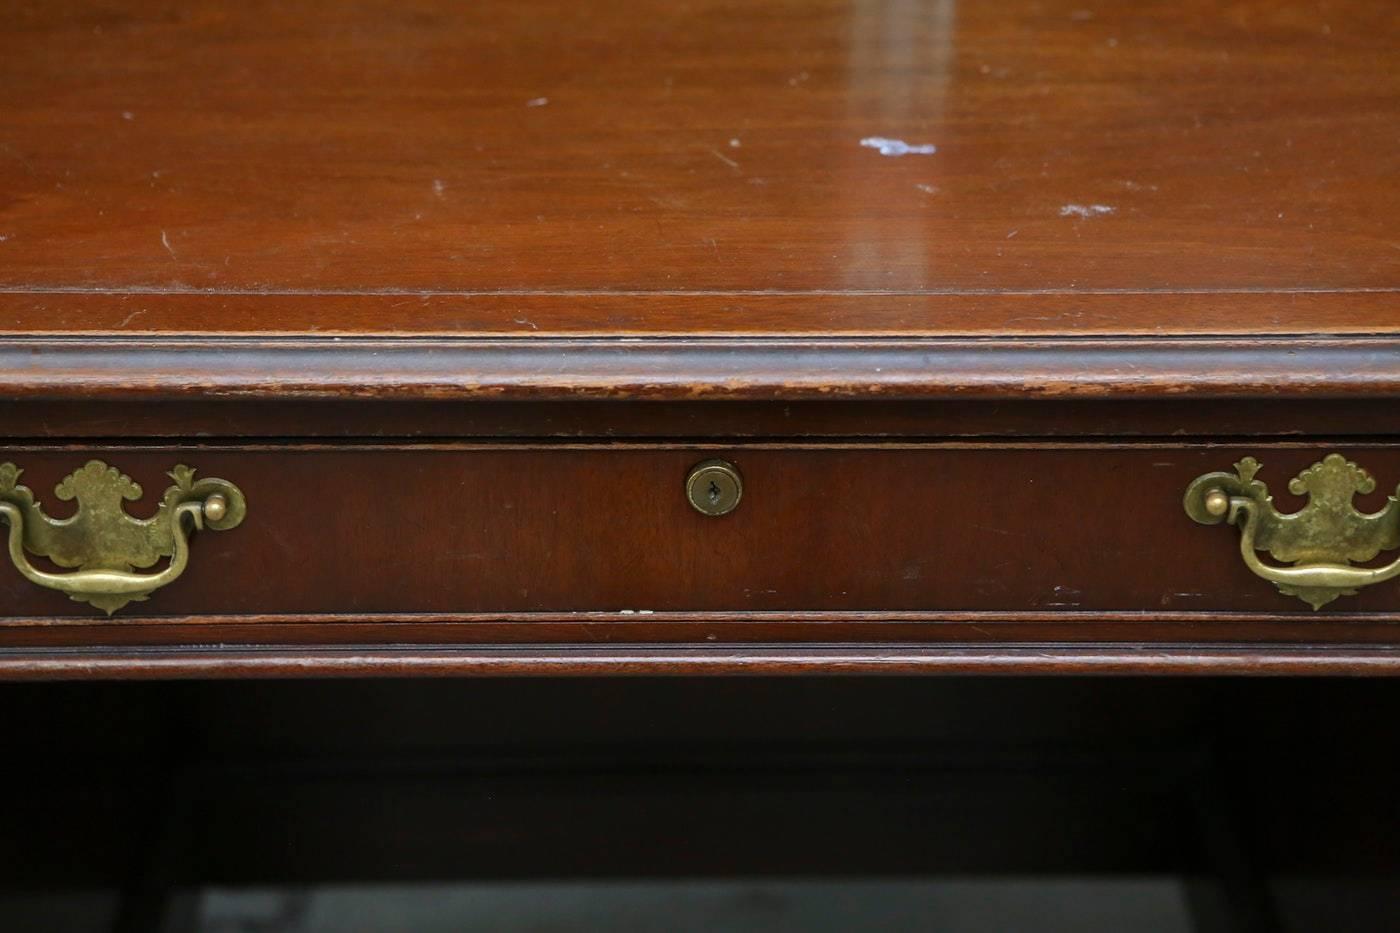 A Kittinger solid wood lawyer's desk. The desk is made of solid mahogany wood. The desk has a long thin drawer in the center flanked by four drawers to the sides. The desk has ornate brass hardware and is market Kittinger on the inside drawer.

In